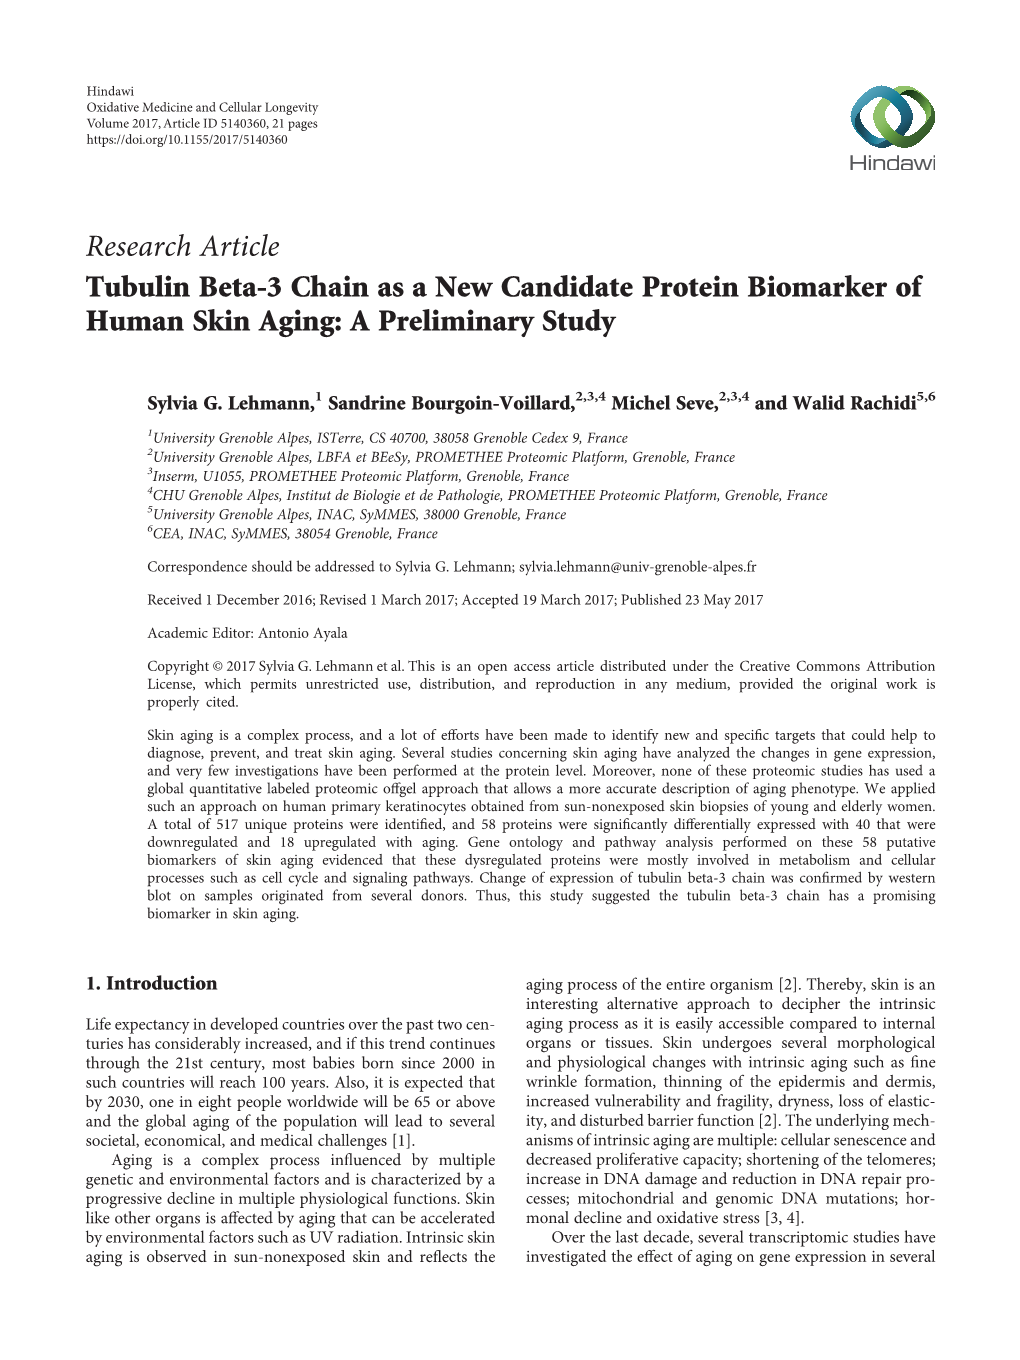 Tubulin Beta-3 Chain As a New Candidate Protein Biomarker of Human Skin Aging: a Preliminary Study